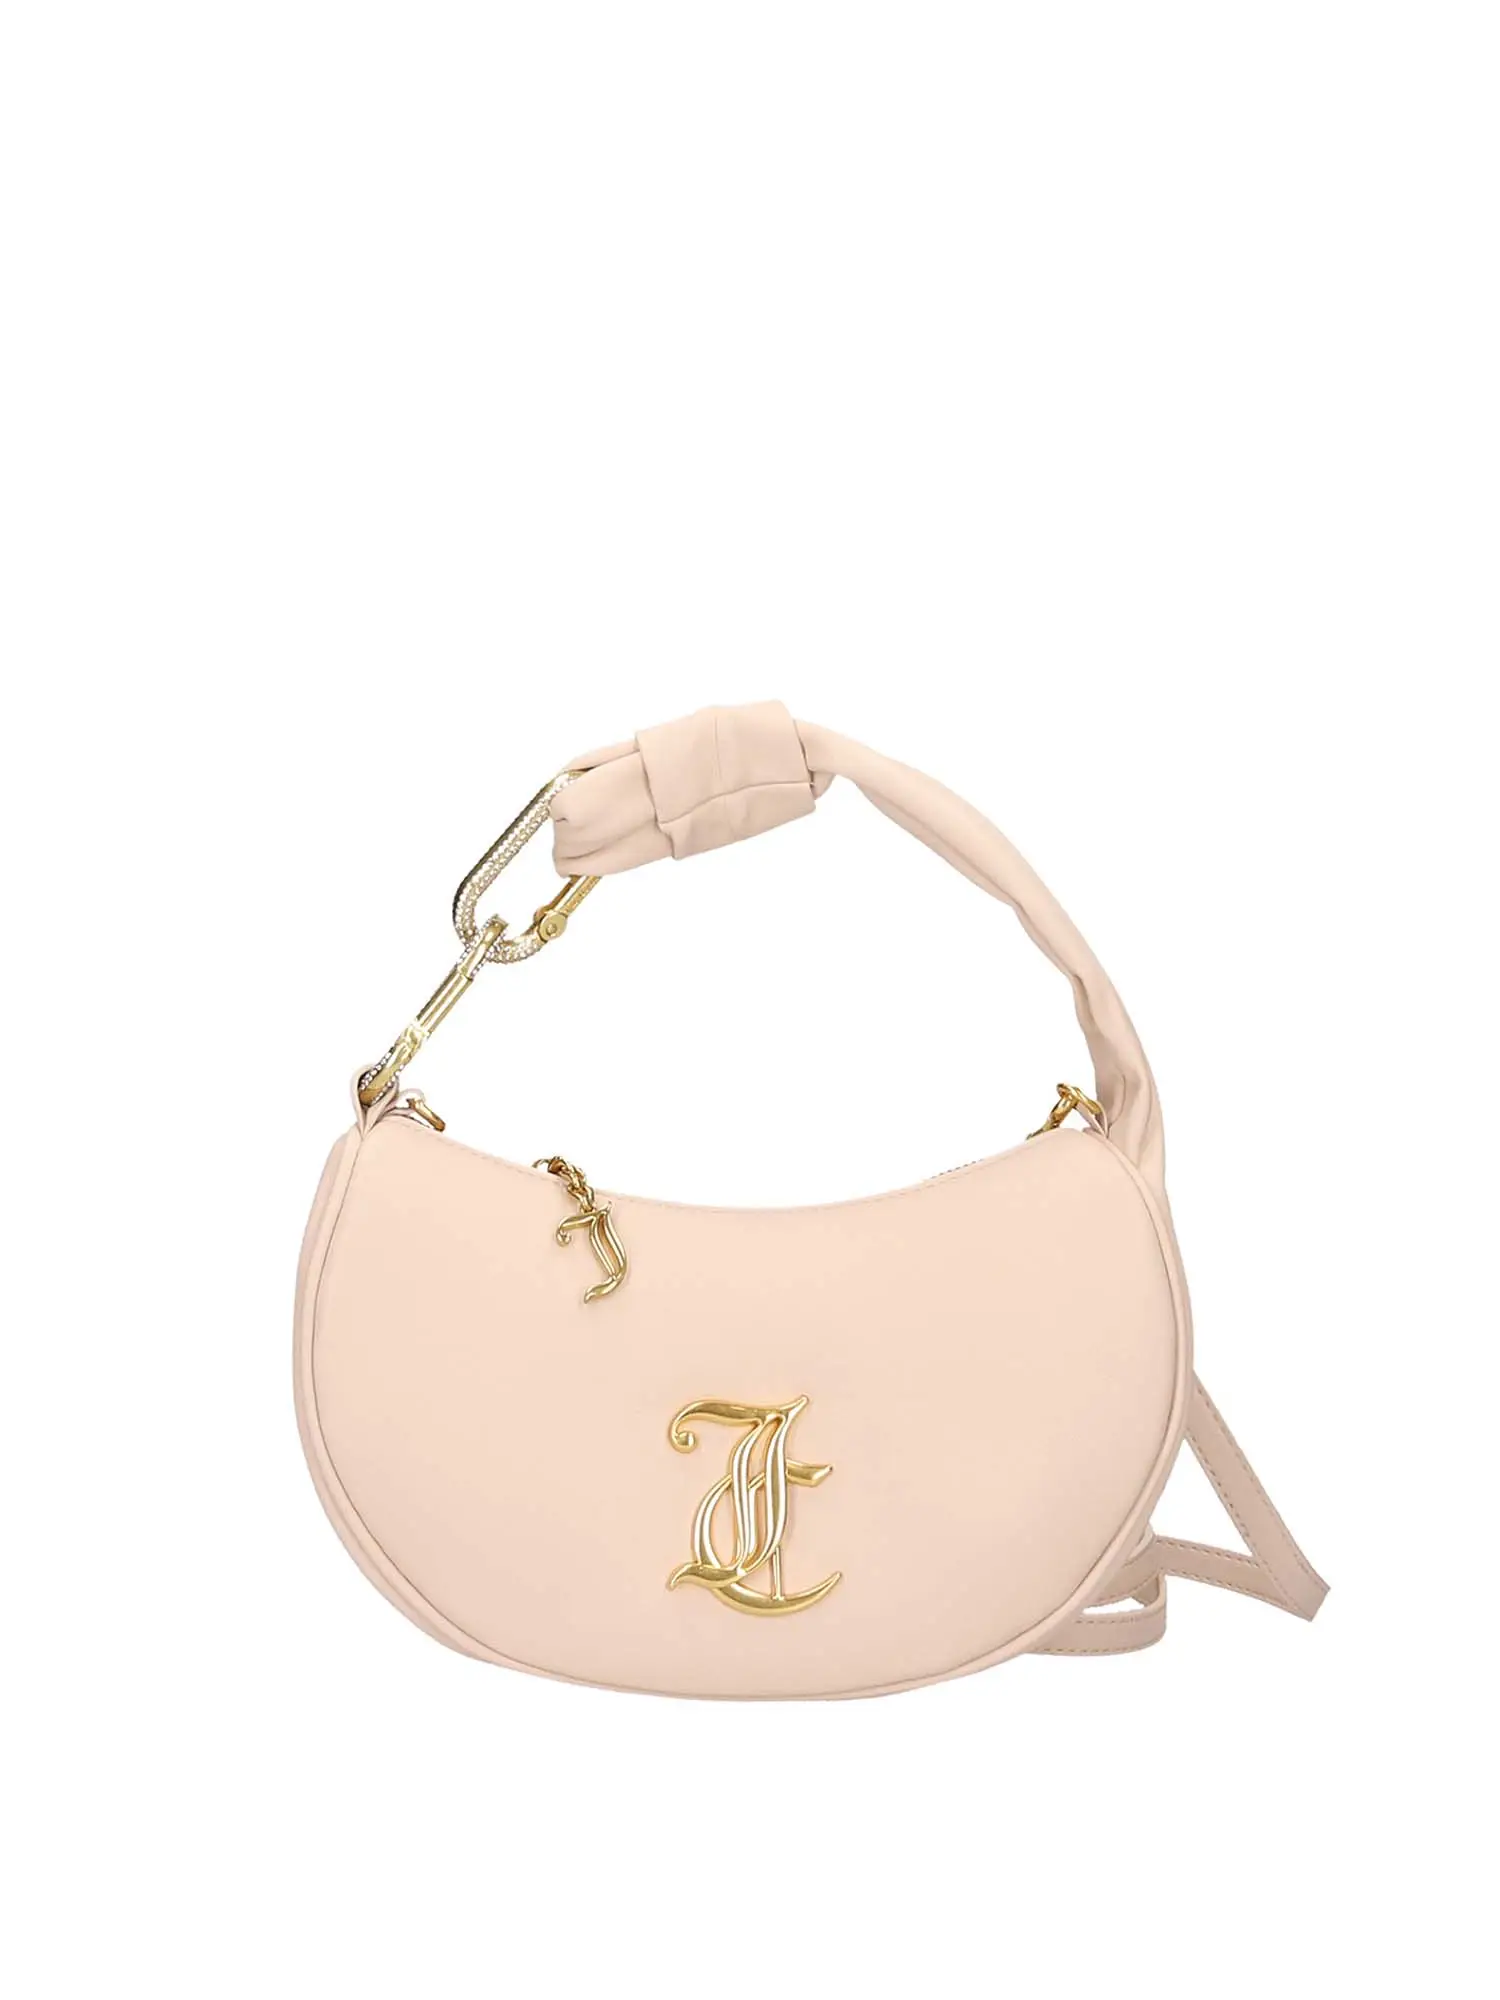 HOBO DONNA - JUICY COUTURE - BEJAY5480WVP - SABBIA, UNICA